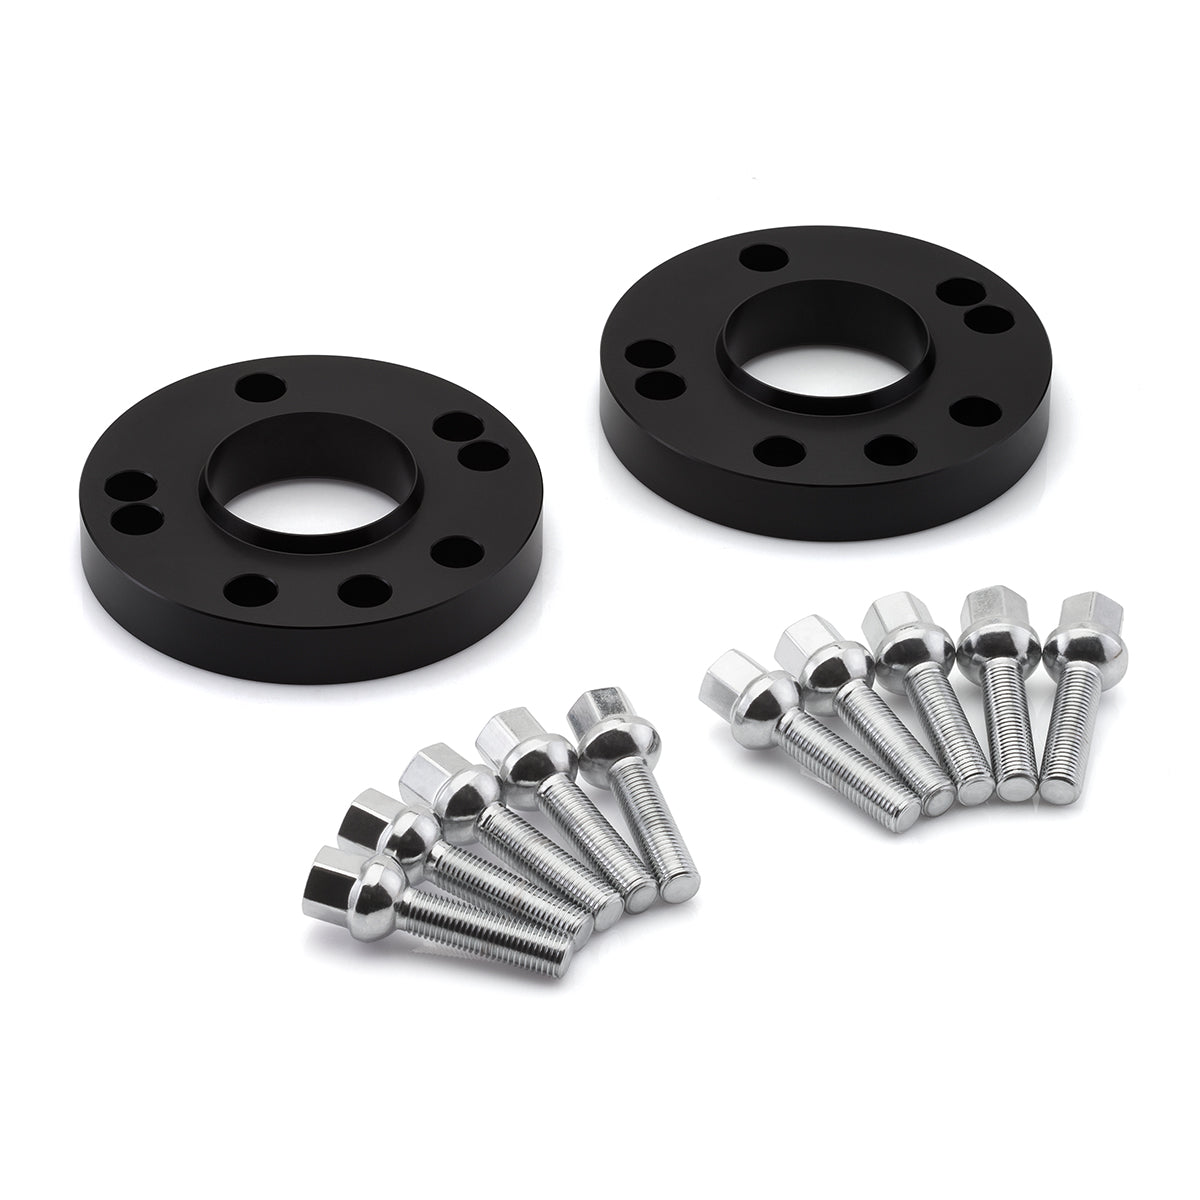 1999-2017 Volkswagen Golf 5x100 57.1 M14 Studs Hubcentric Wheelcentric Wheel Spacers Set of 2-Wheel Spacer-Blackpathinc